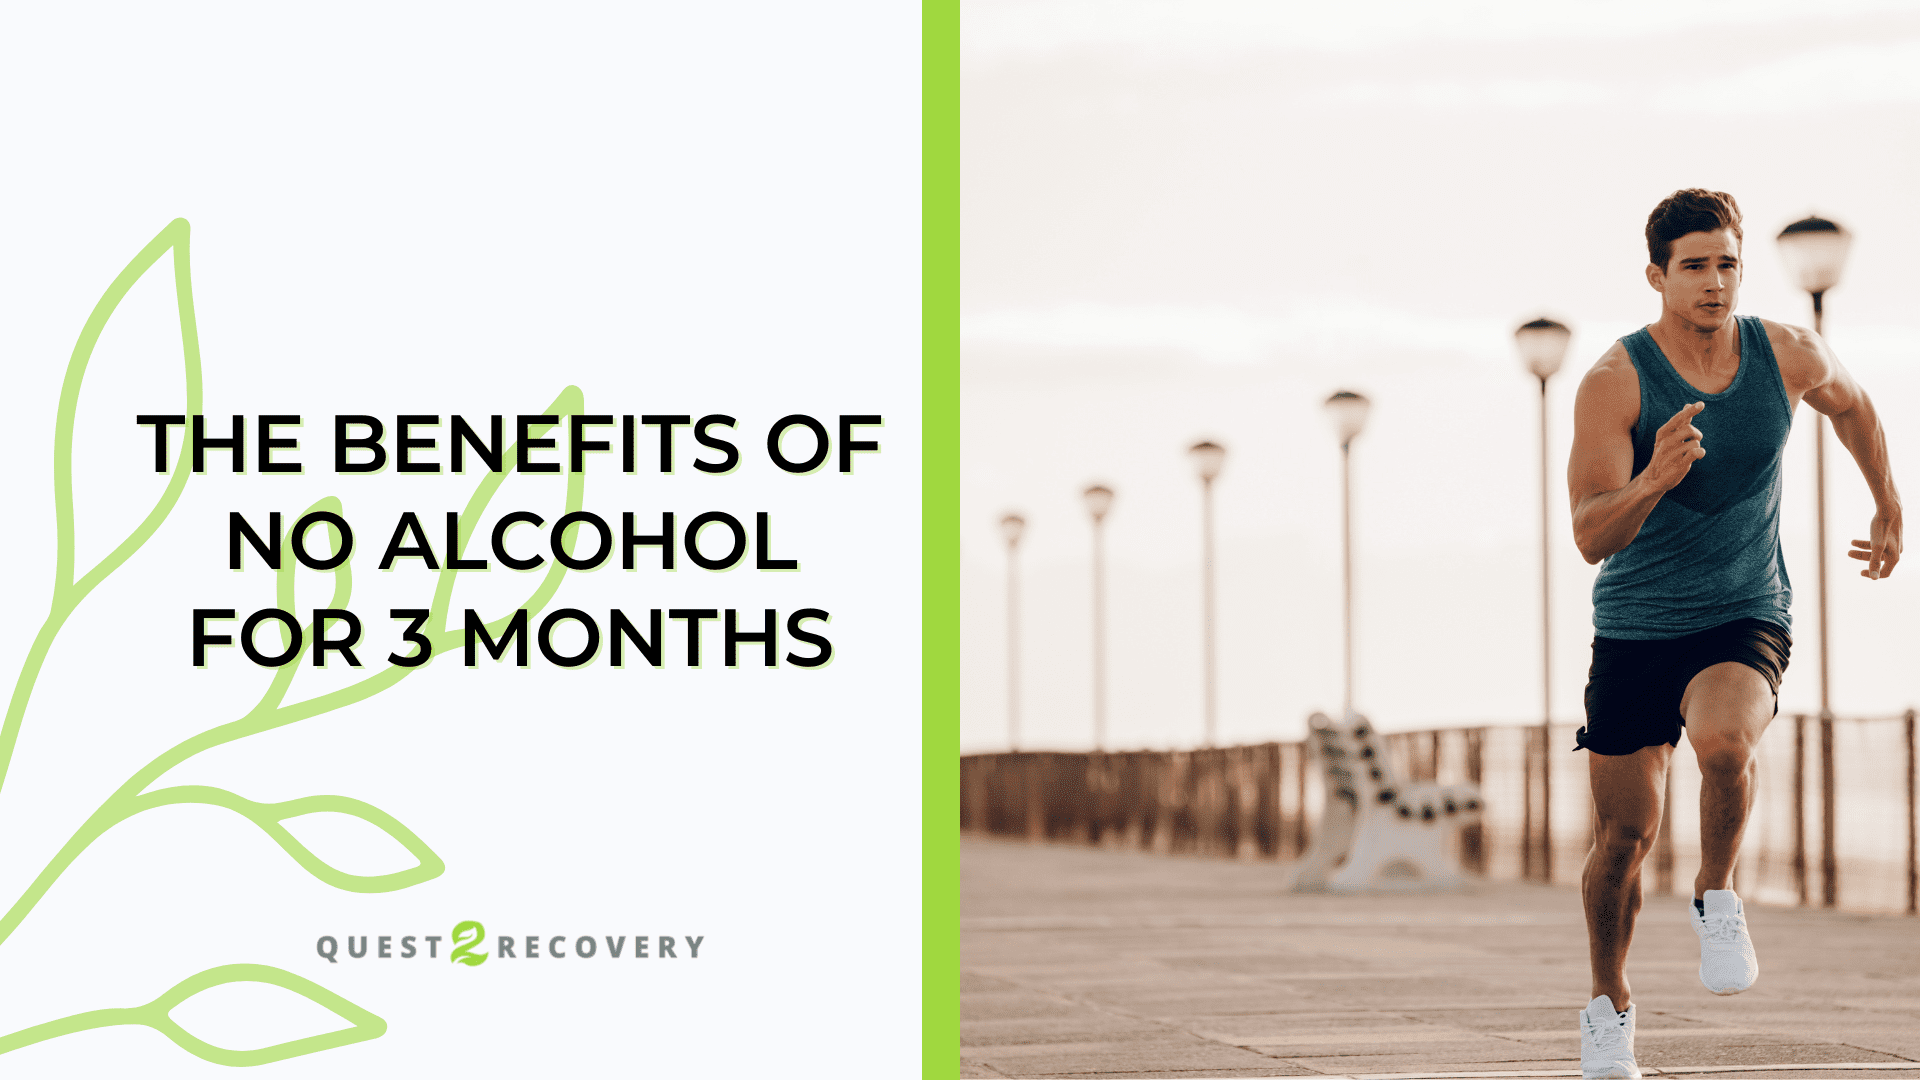 The Benefits of Giving up Alcohol for a Month